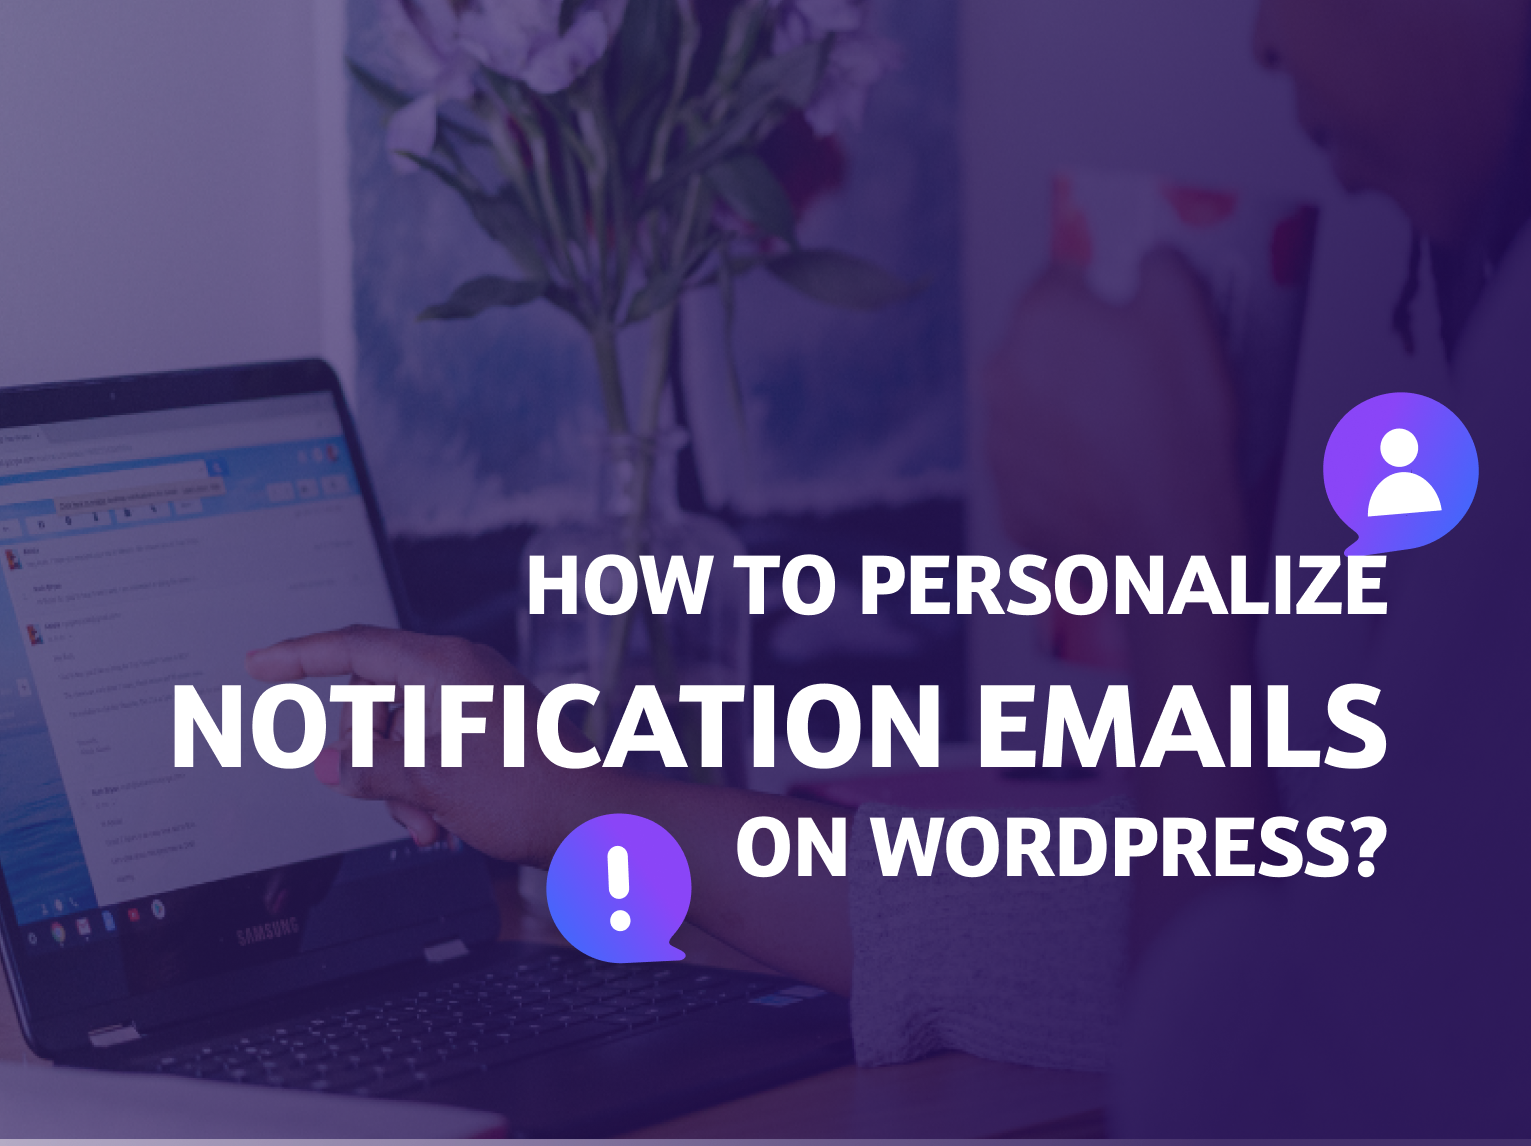 How to Personalize Notification Emails on WordPress for Better Engagement - 3 Strategies to implement on the fly!